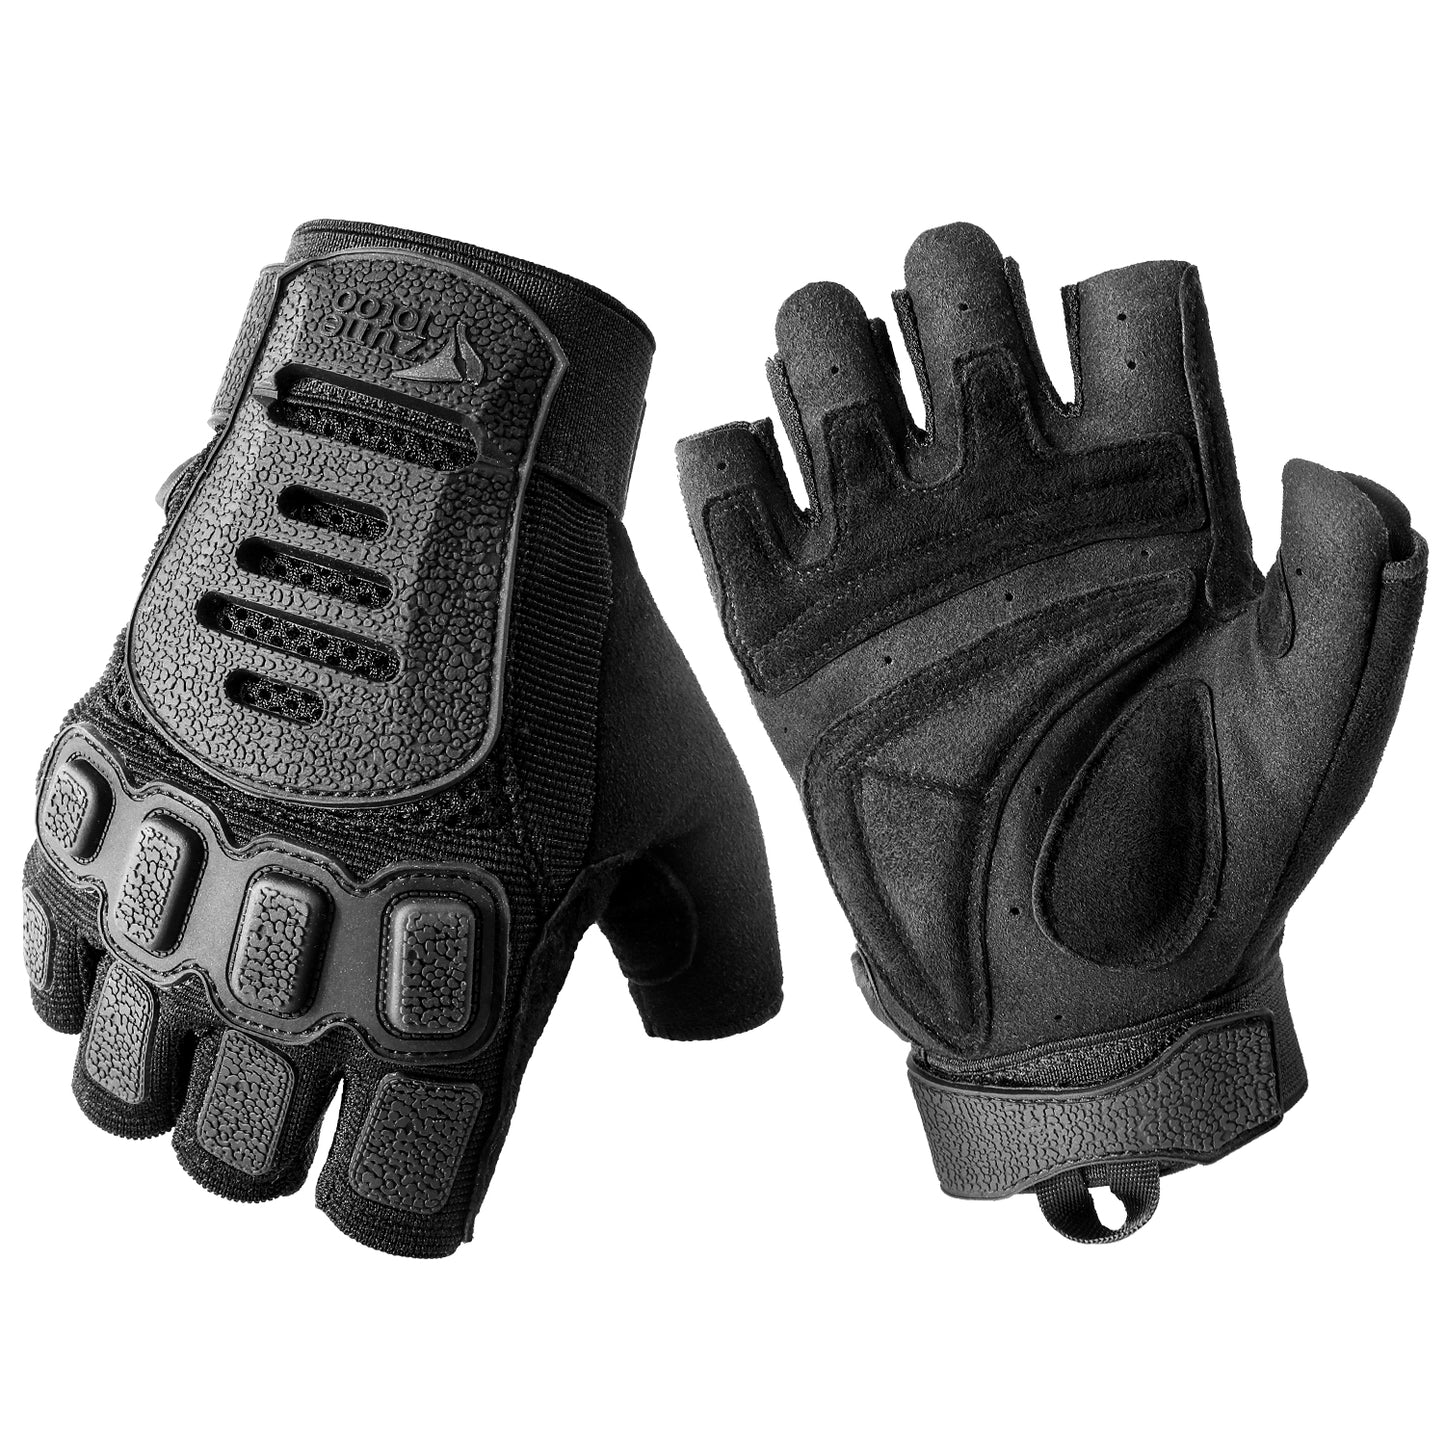 Tactical gloves ZG-002 100% accurate knuckle protection Half-finger